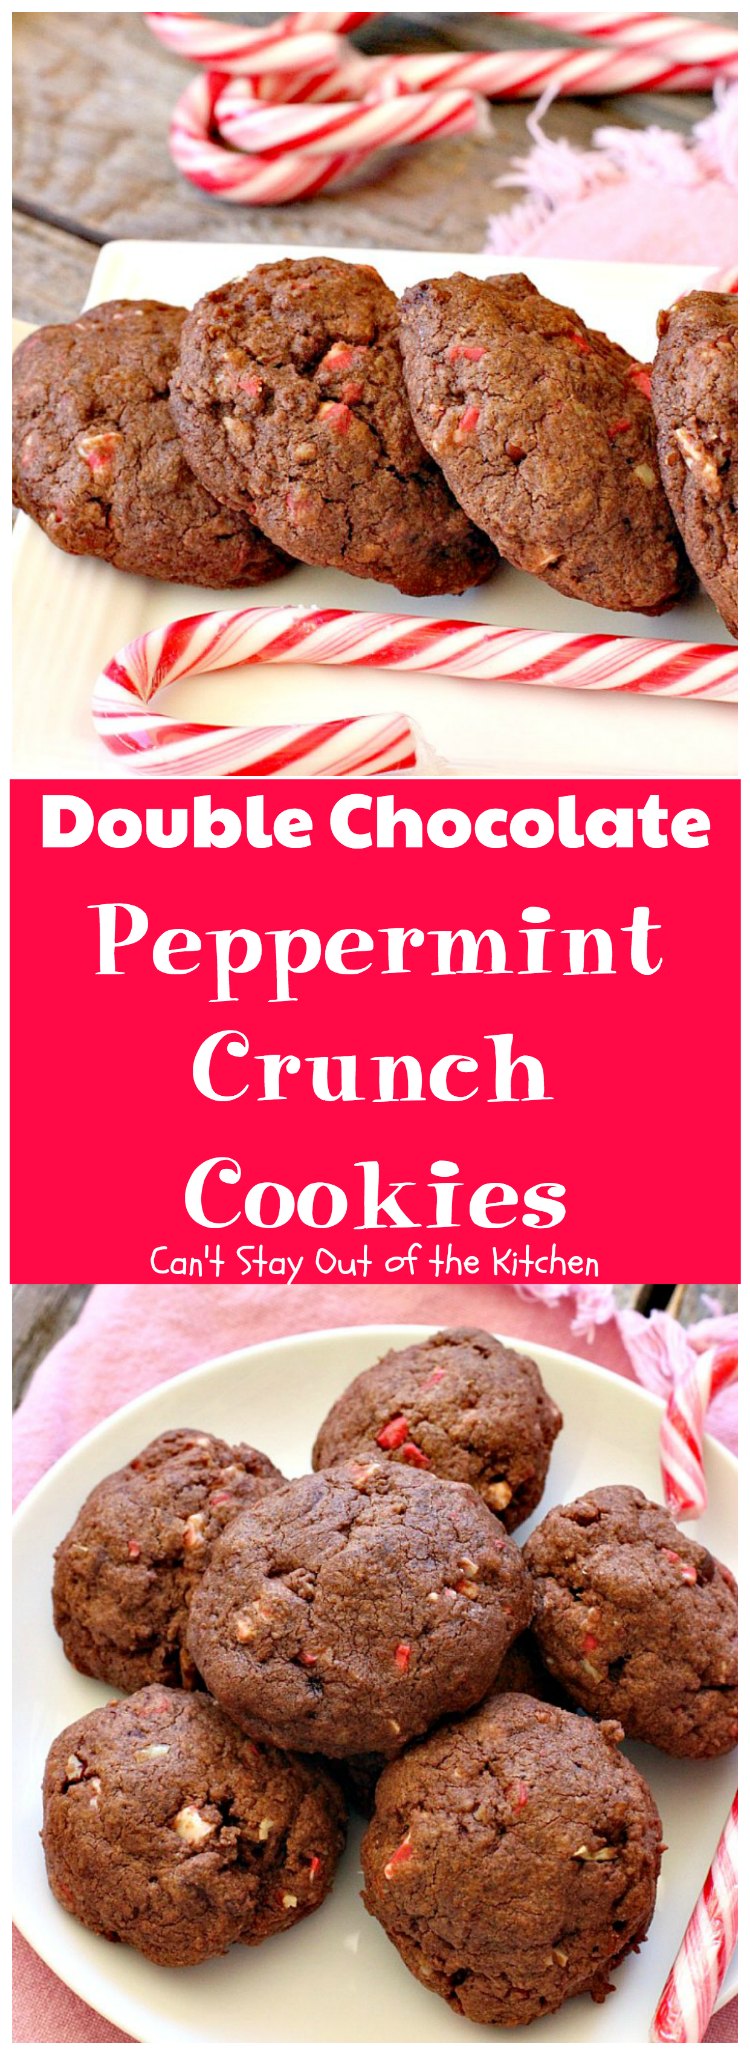 Double Chocolate Peppermint Crunch Cookies | Can't Stay Out of the Kitchen